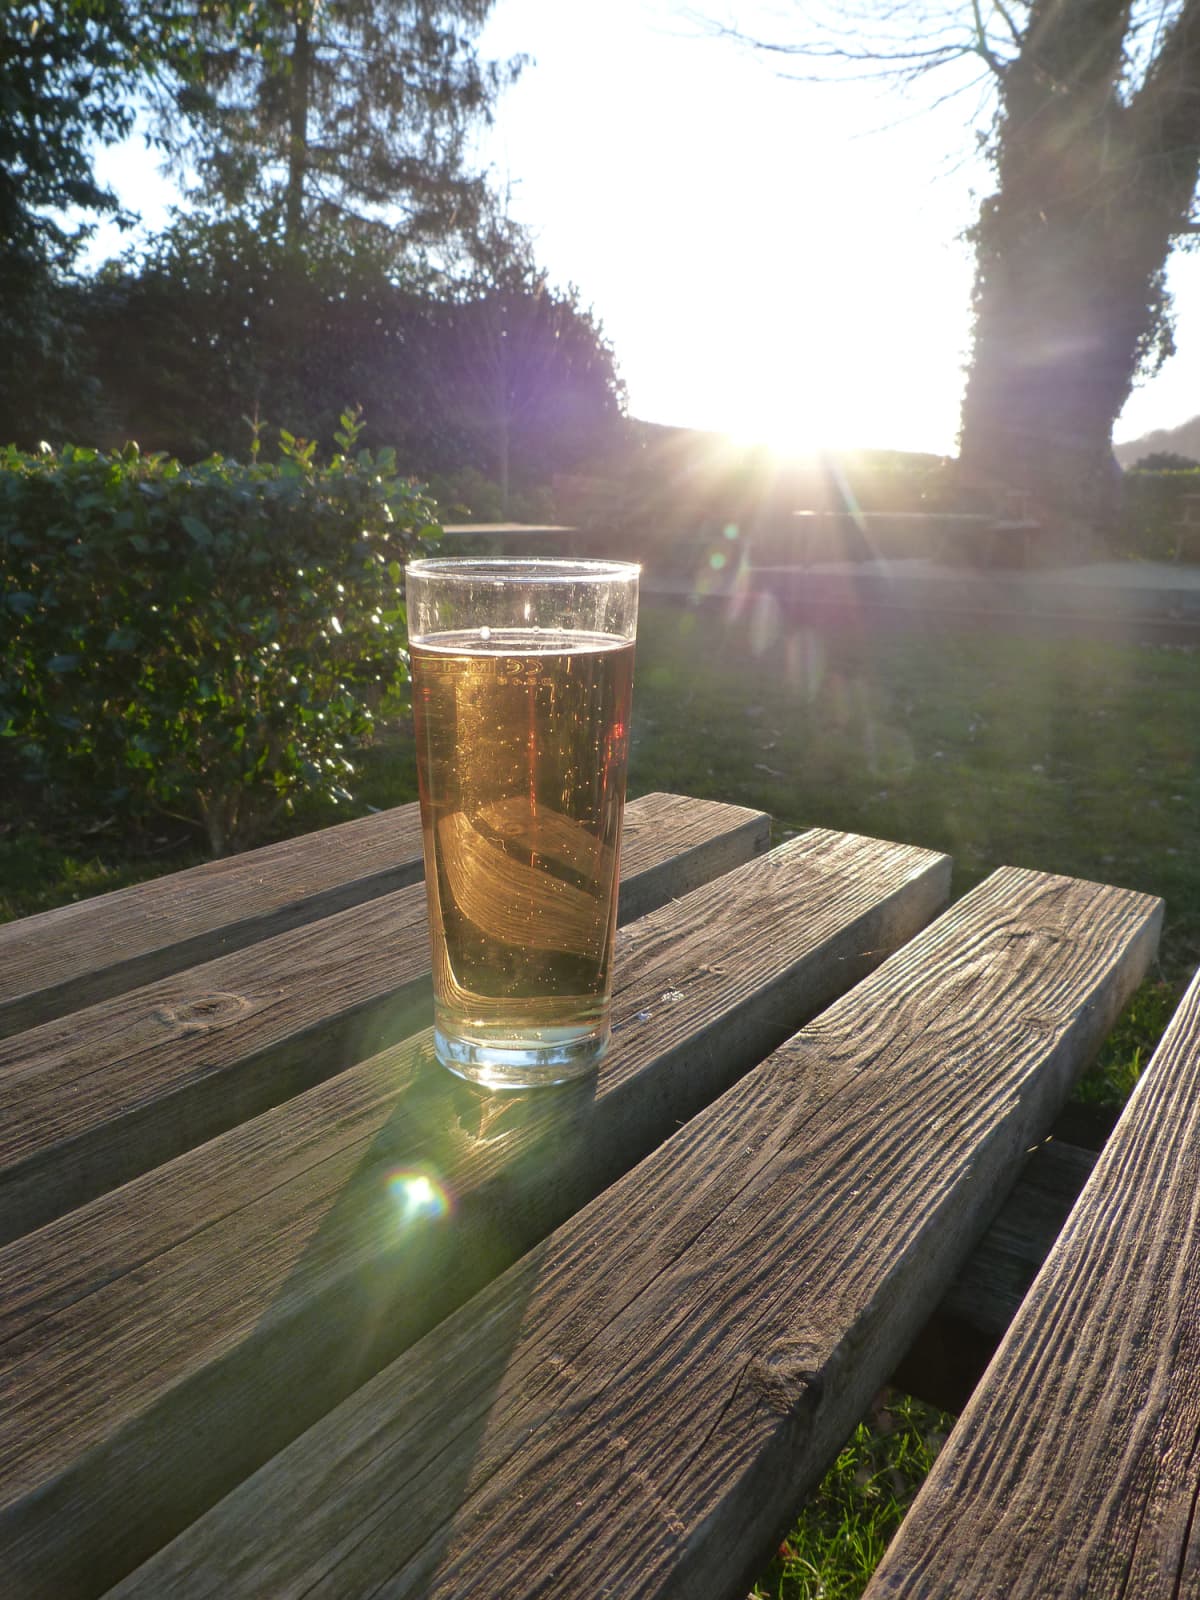 A pint of beer on a garden table in the sunshine.